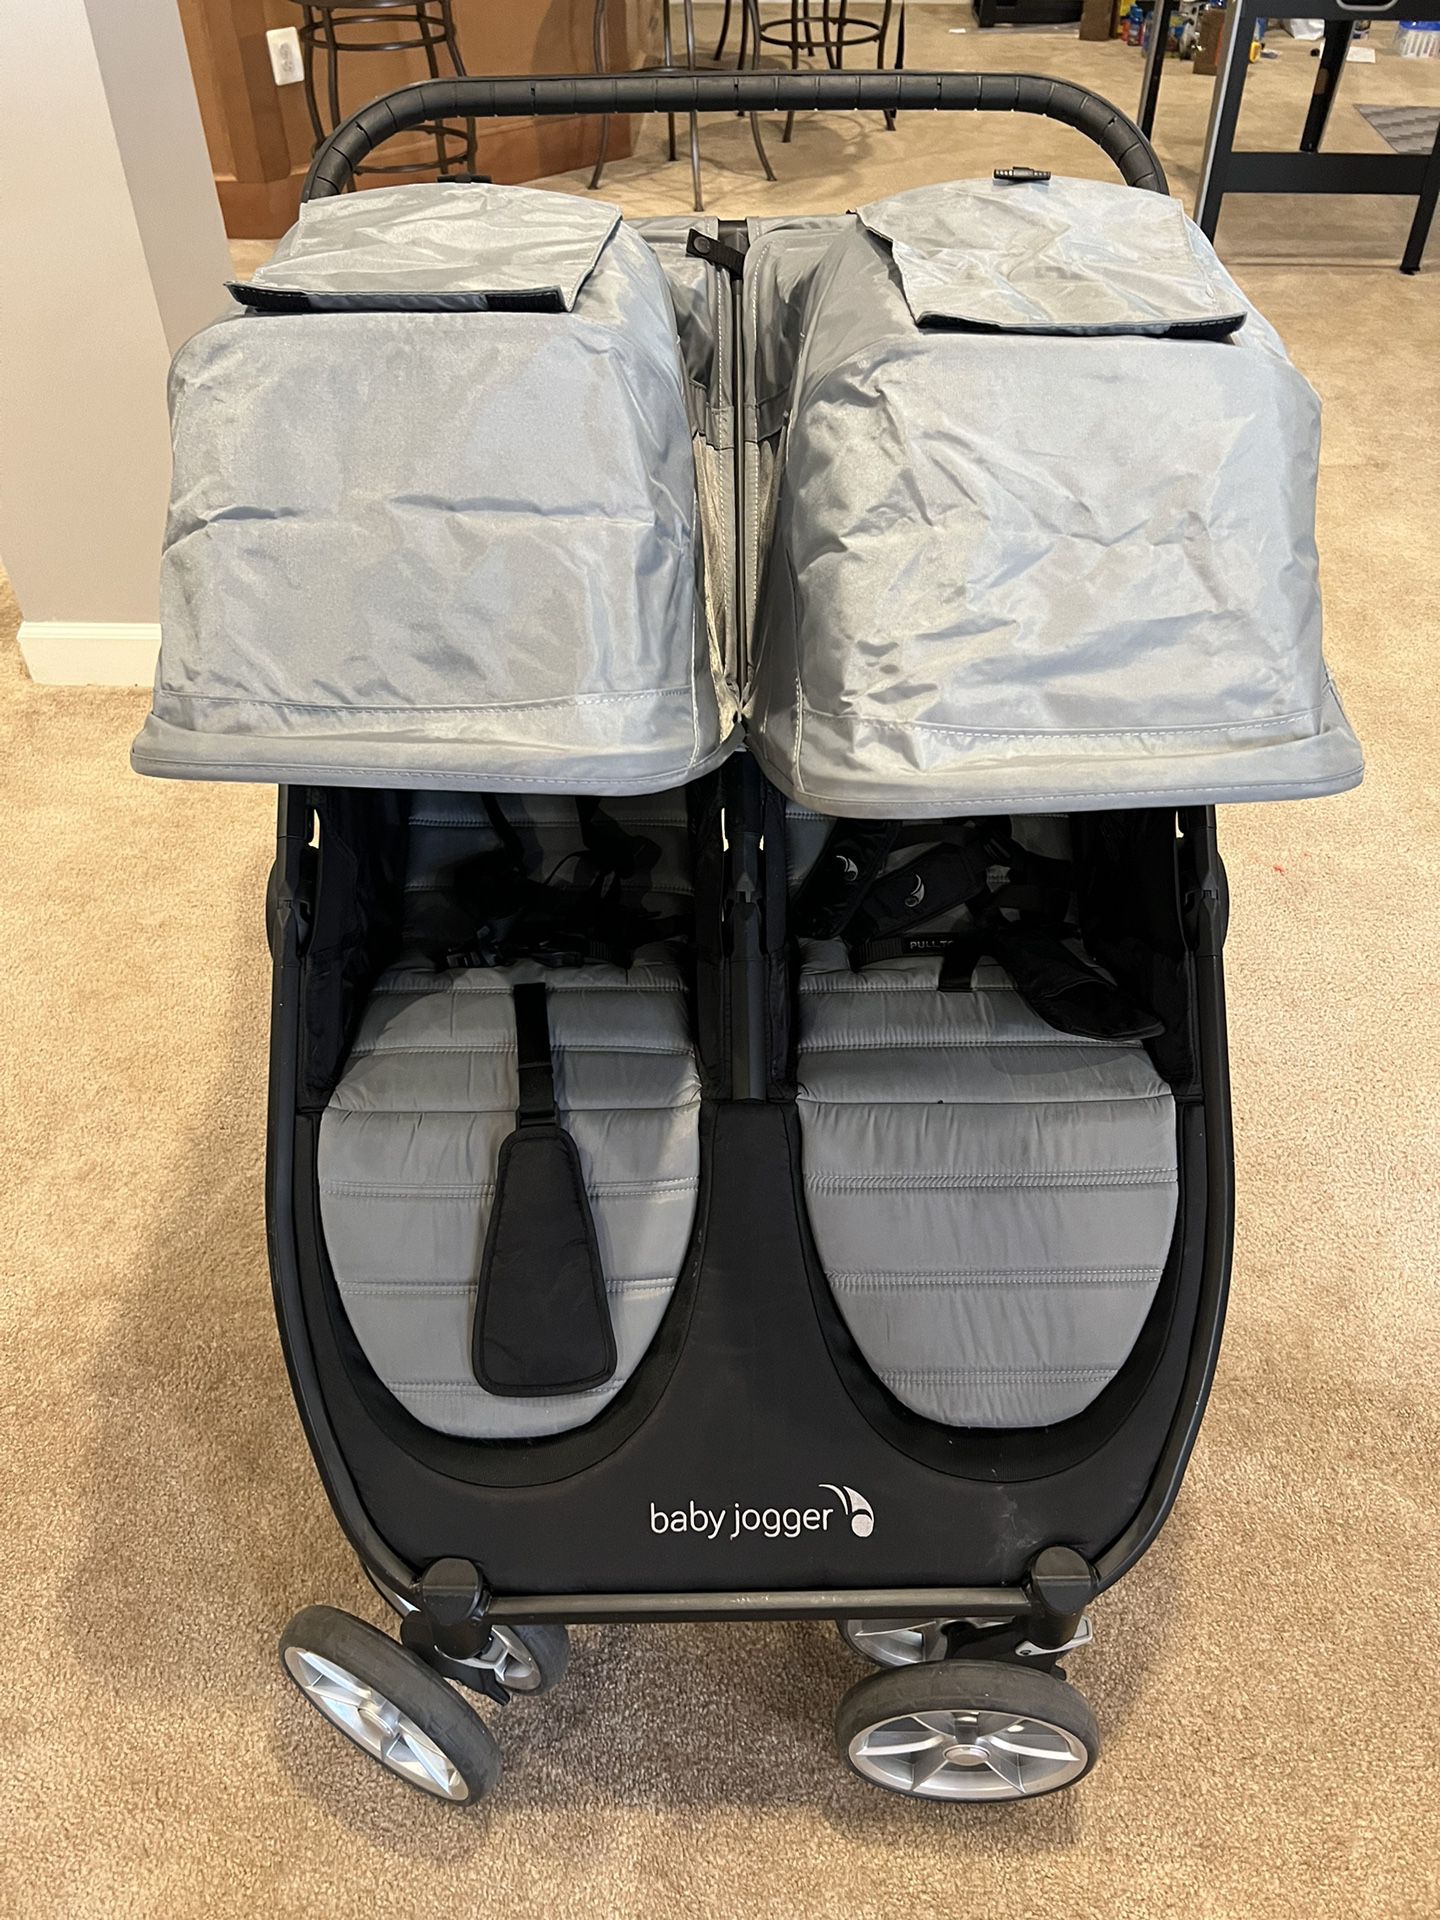 Baby jogger Double Stroller